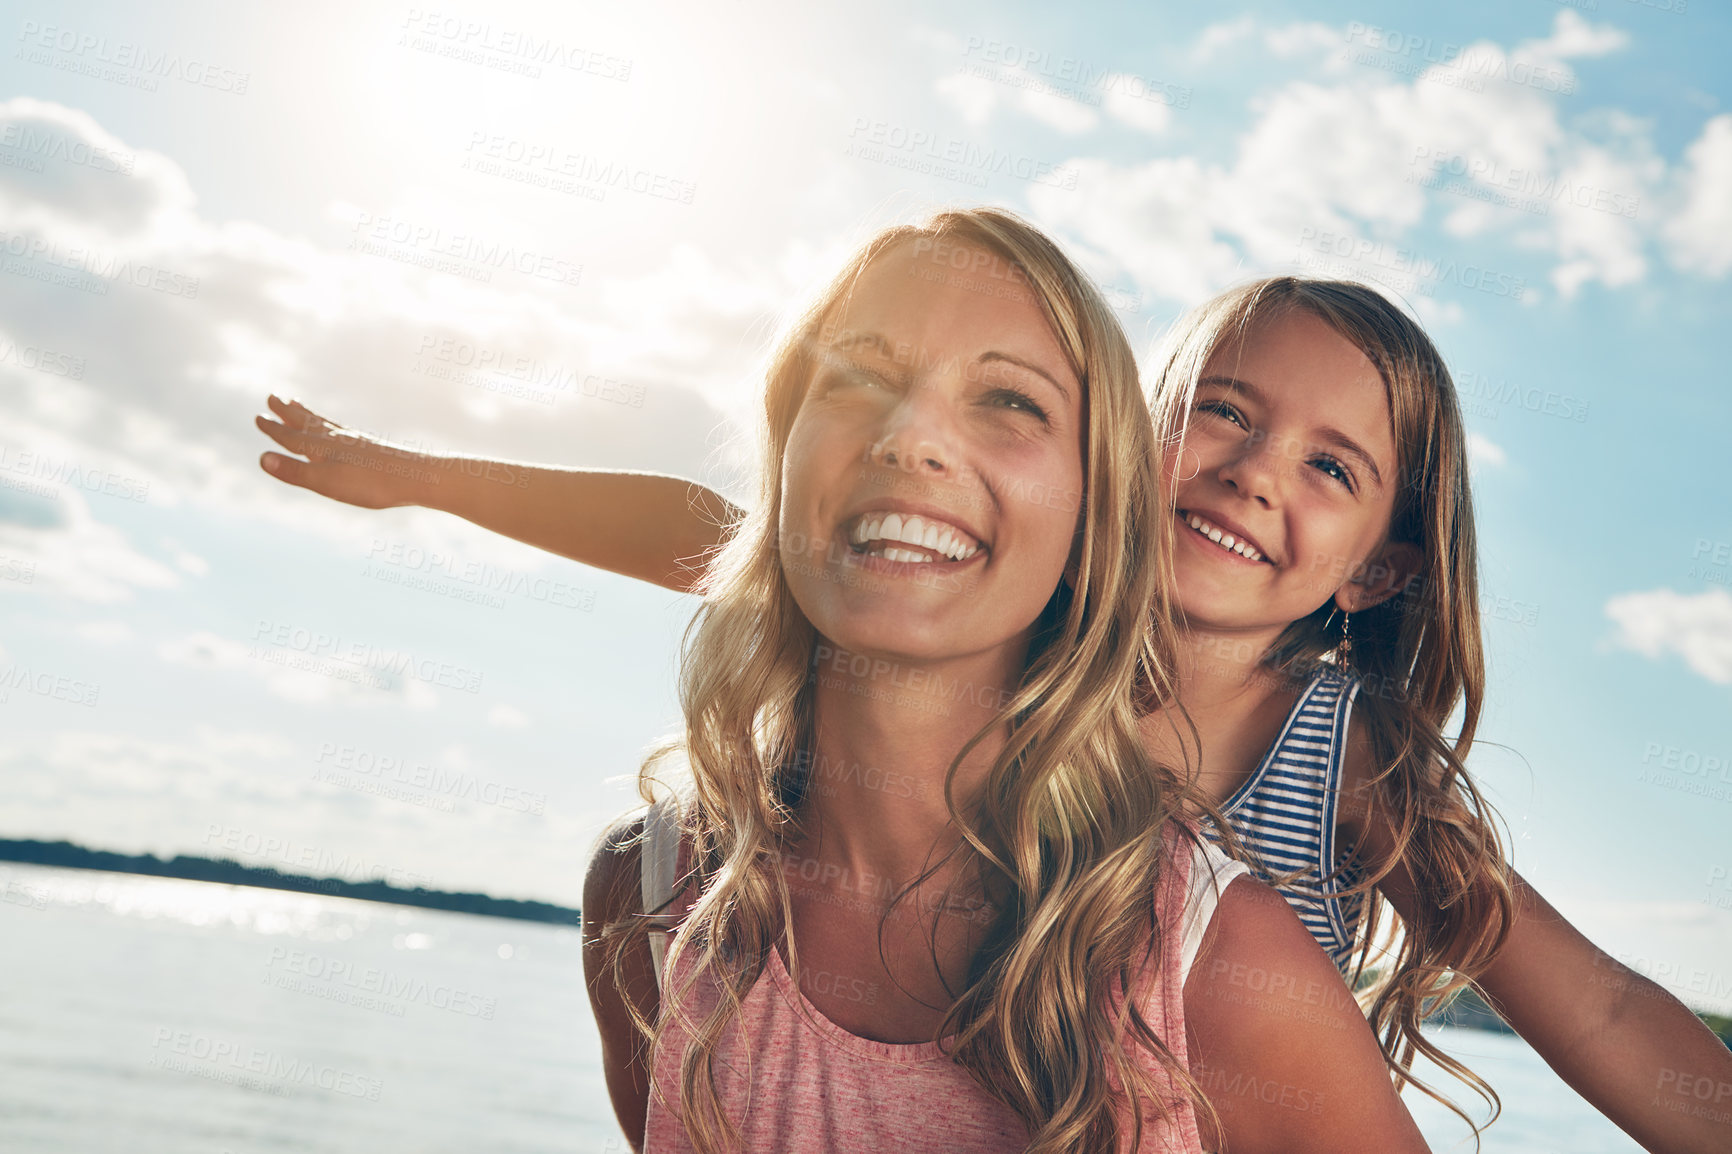 Buy stock photo Sky, mother and child on beach with airplane, smile and playing on adventure holiday in Australia. Travel, mom and girl on ocean vacation with summer fun, happy laugh and bonding together with games.